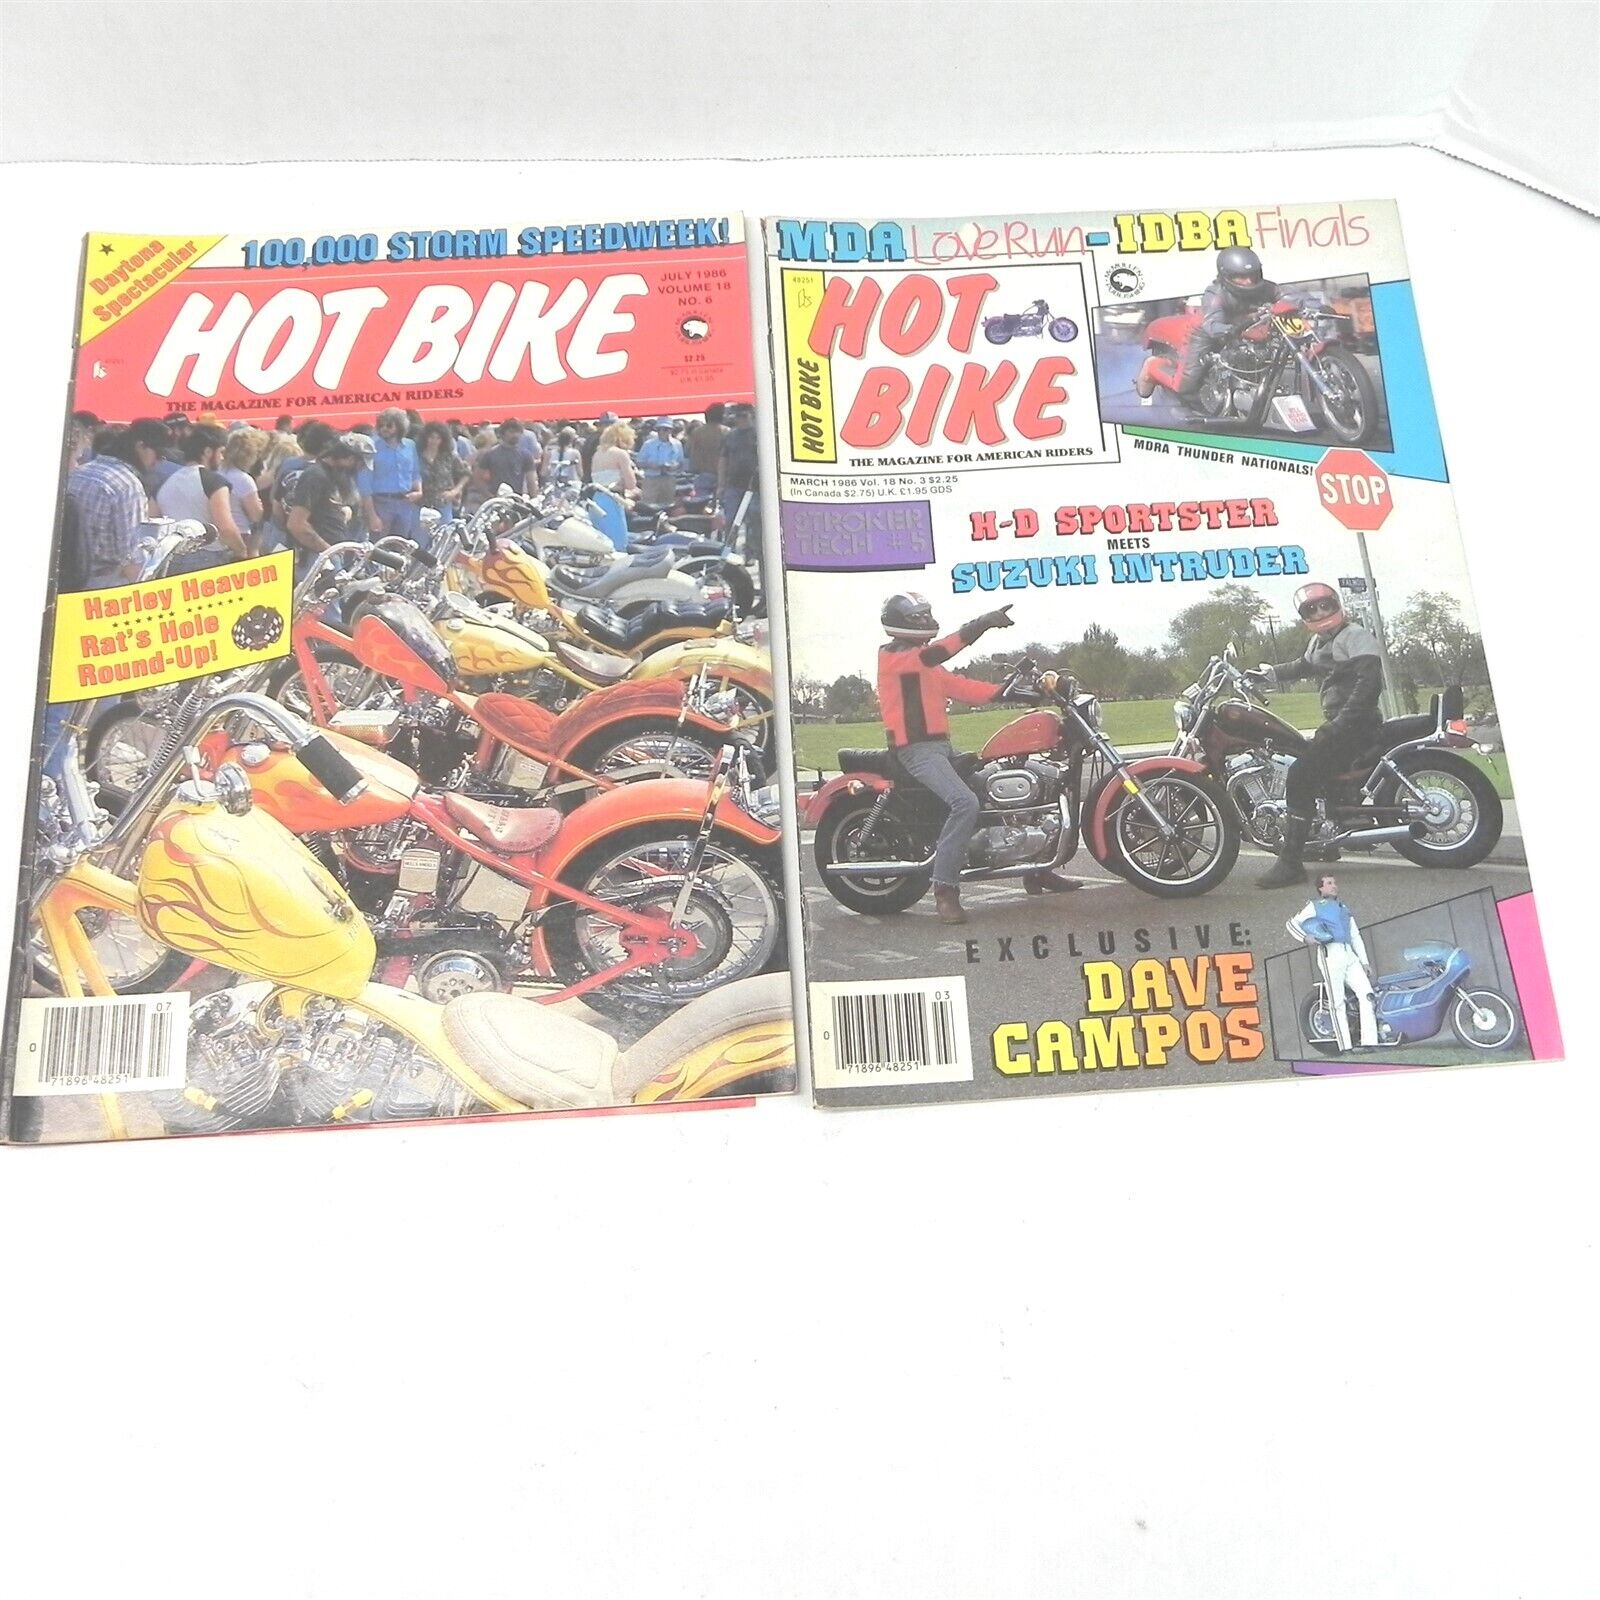 VINTAGE 1986 HOT BIKE MAGAZINE LOT OF 2 ISSUES MOTORCYCLES CUSTOM CHOPPERS 